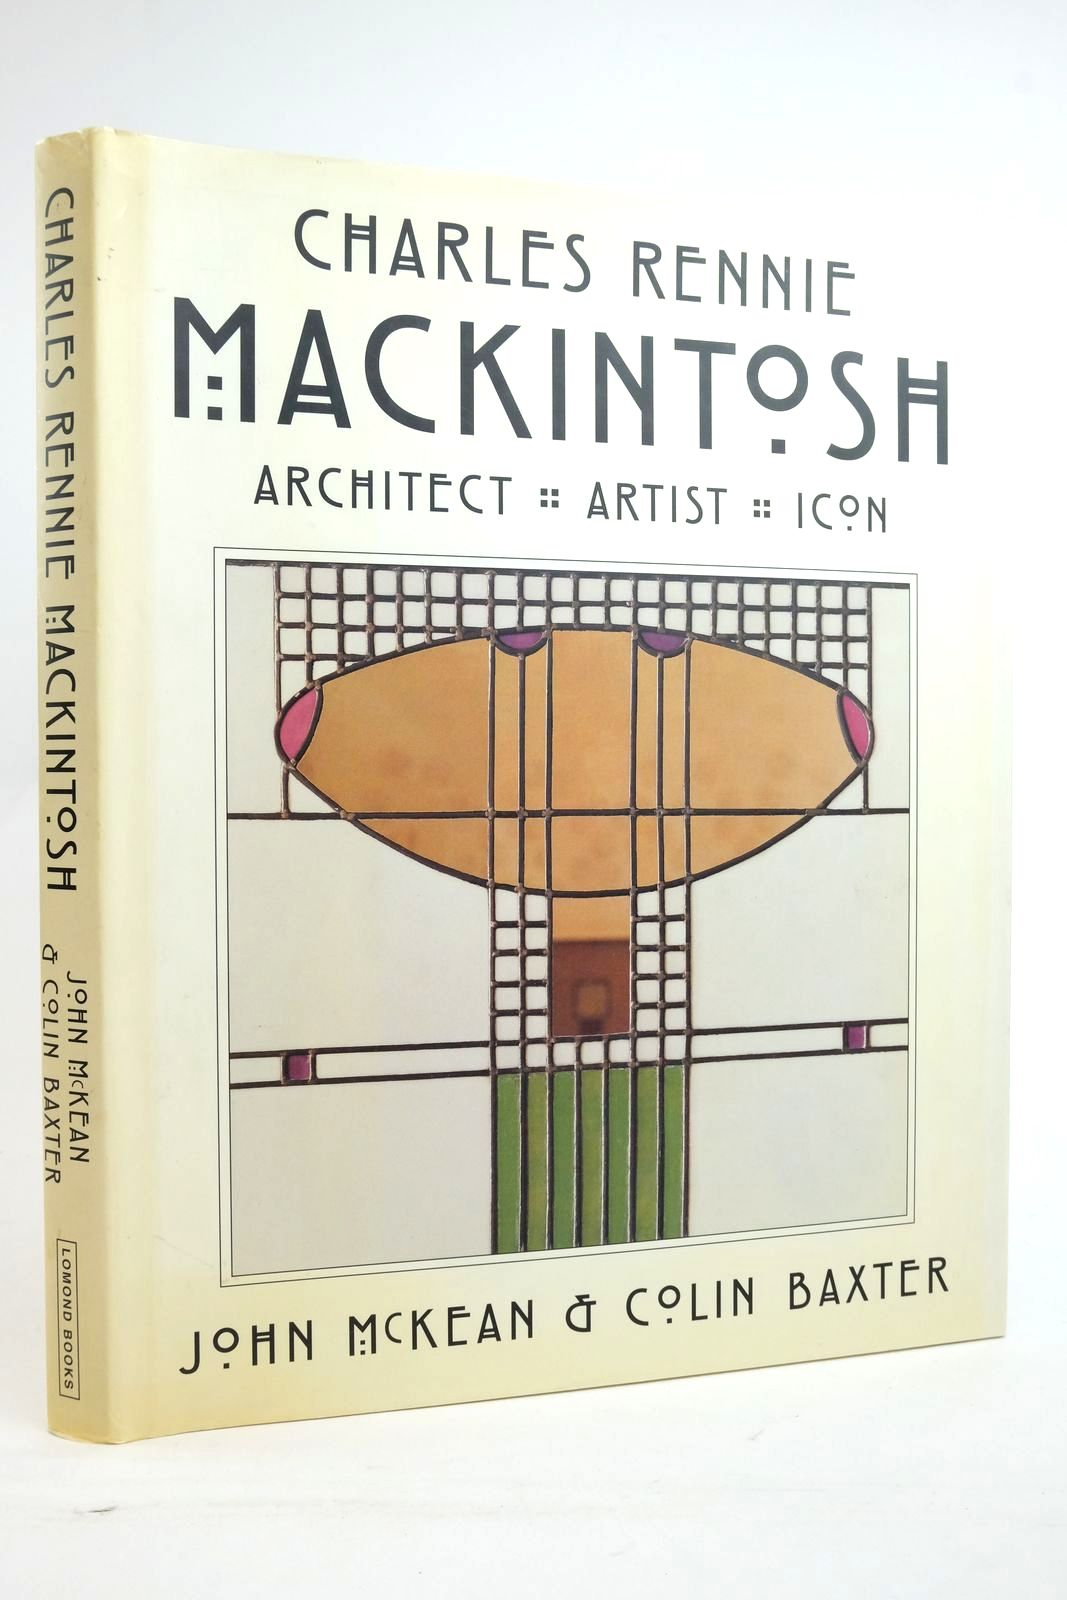 Photo of CHARLES RENNIE MACKINTOSH written by McKean, John illustrated by Mackintosh, Charles Rennie published by Lomond Books (STOCK CODE: 2136458)  for sale by Stella & Rose's Books